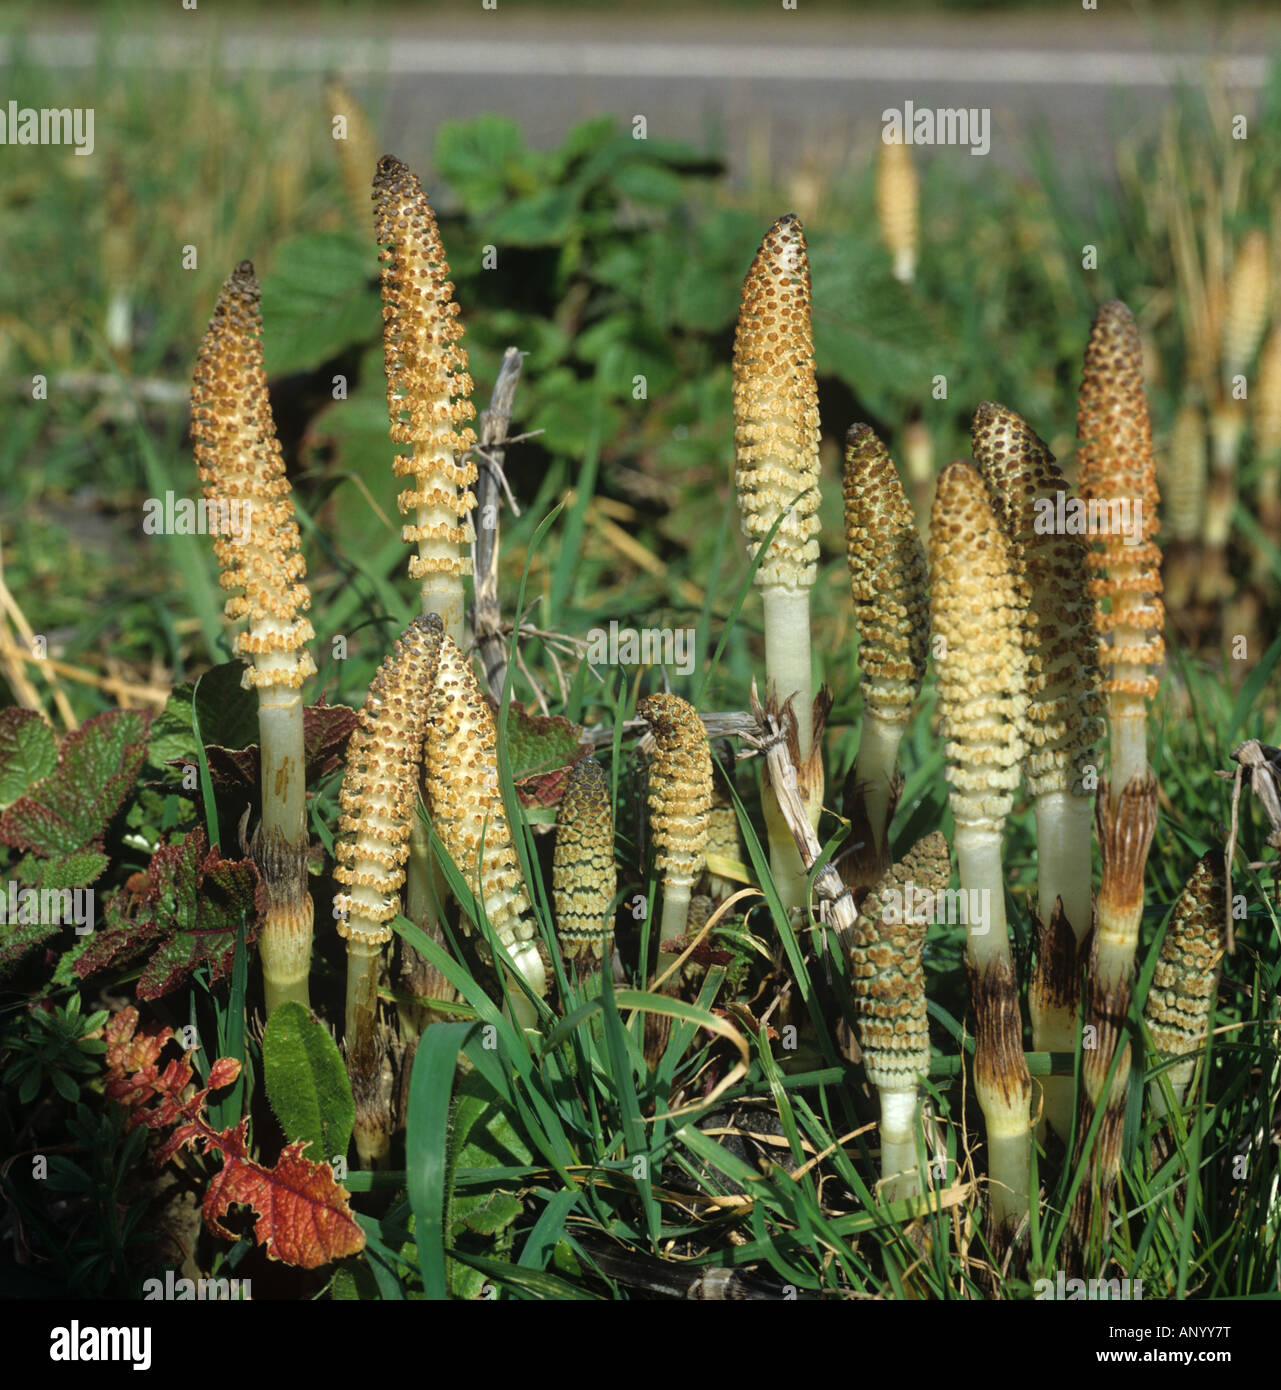 Common horsetail (Equisetum arvense) non-photosynthetic, spore-bearing, fertile shoots or stems on roadside verge in spring Stock Photo